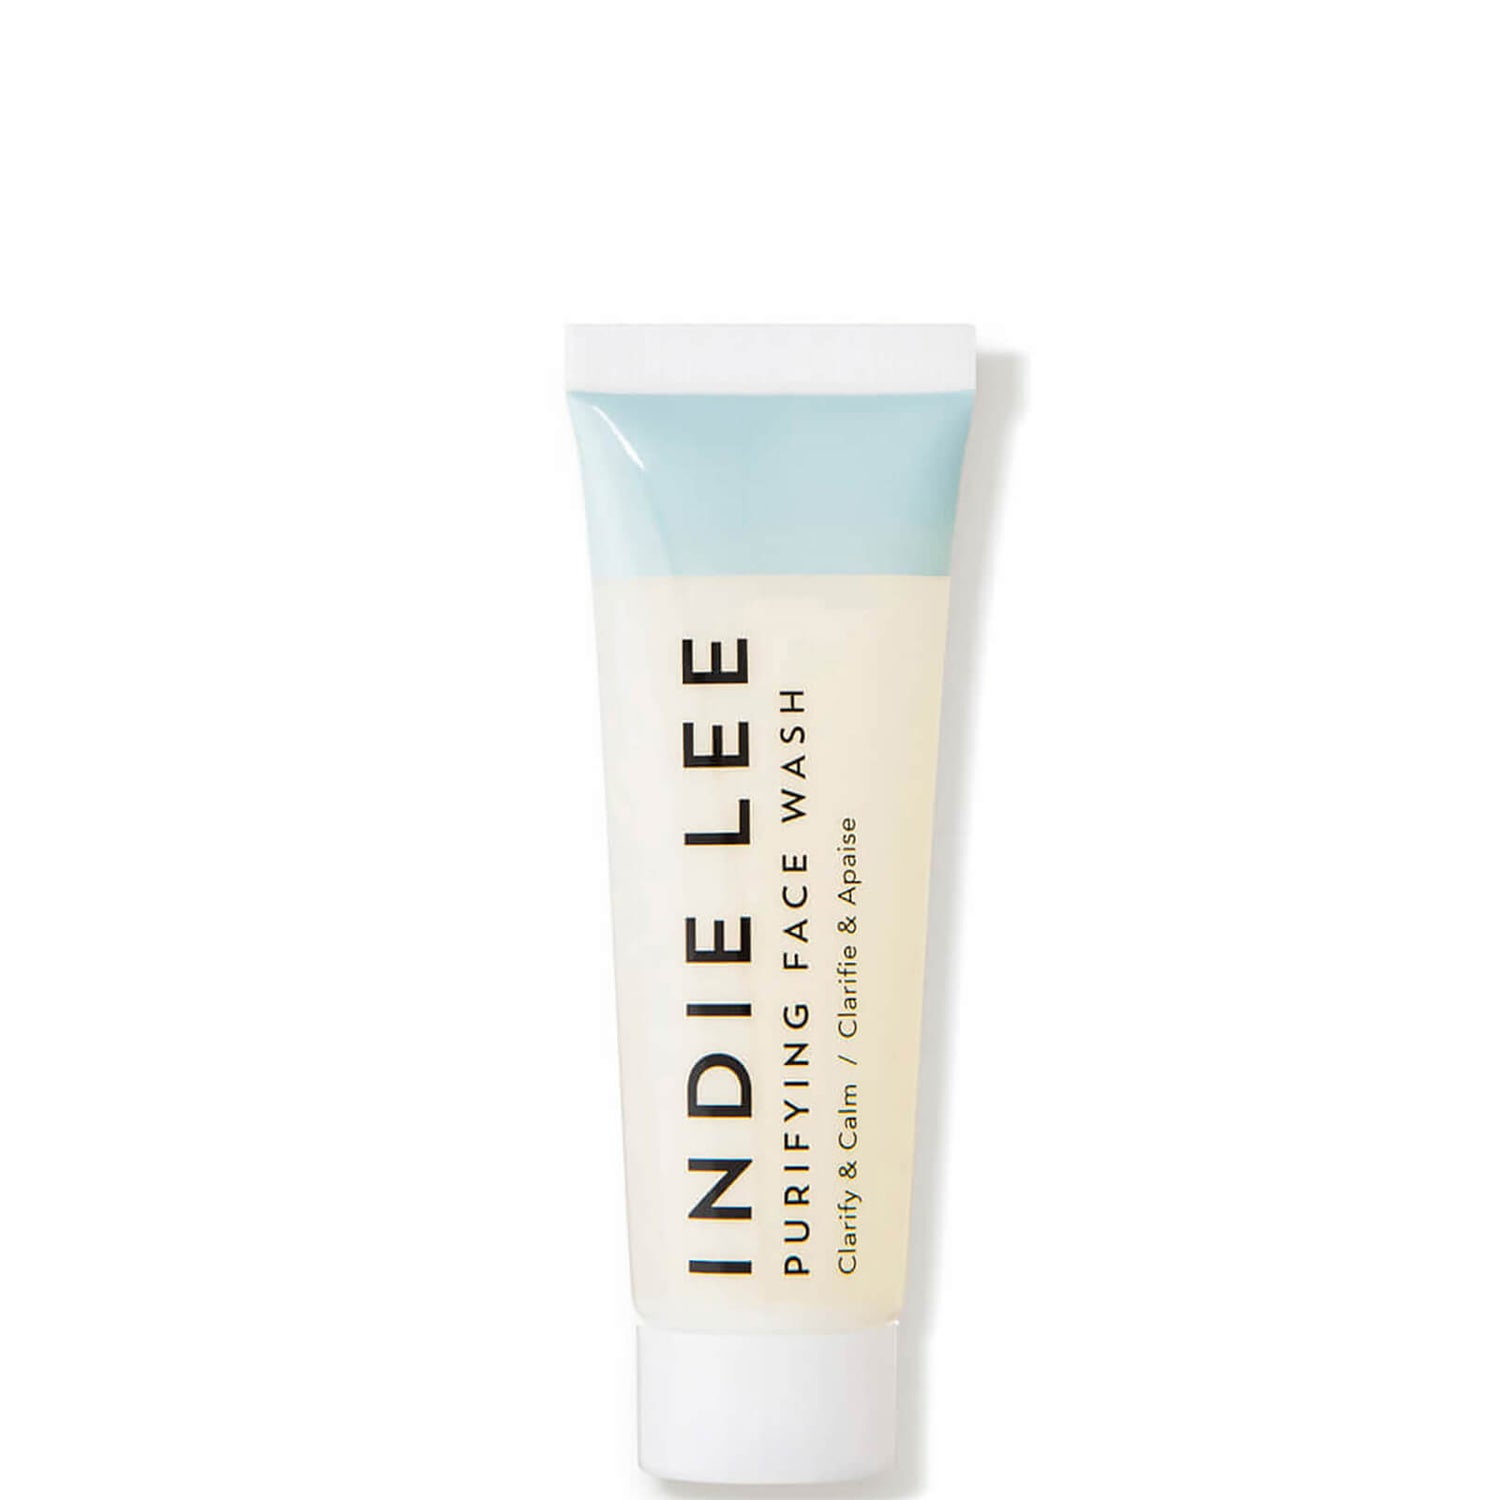 Indie Lee Purifying Face Wash (1 fl. oz.)